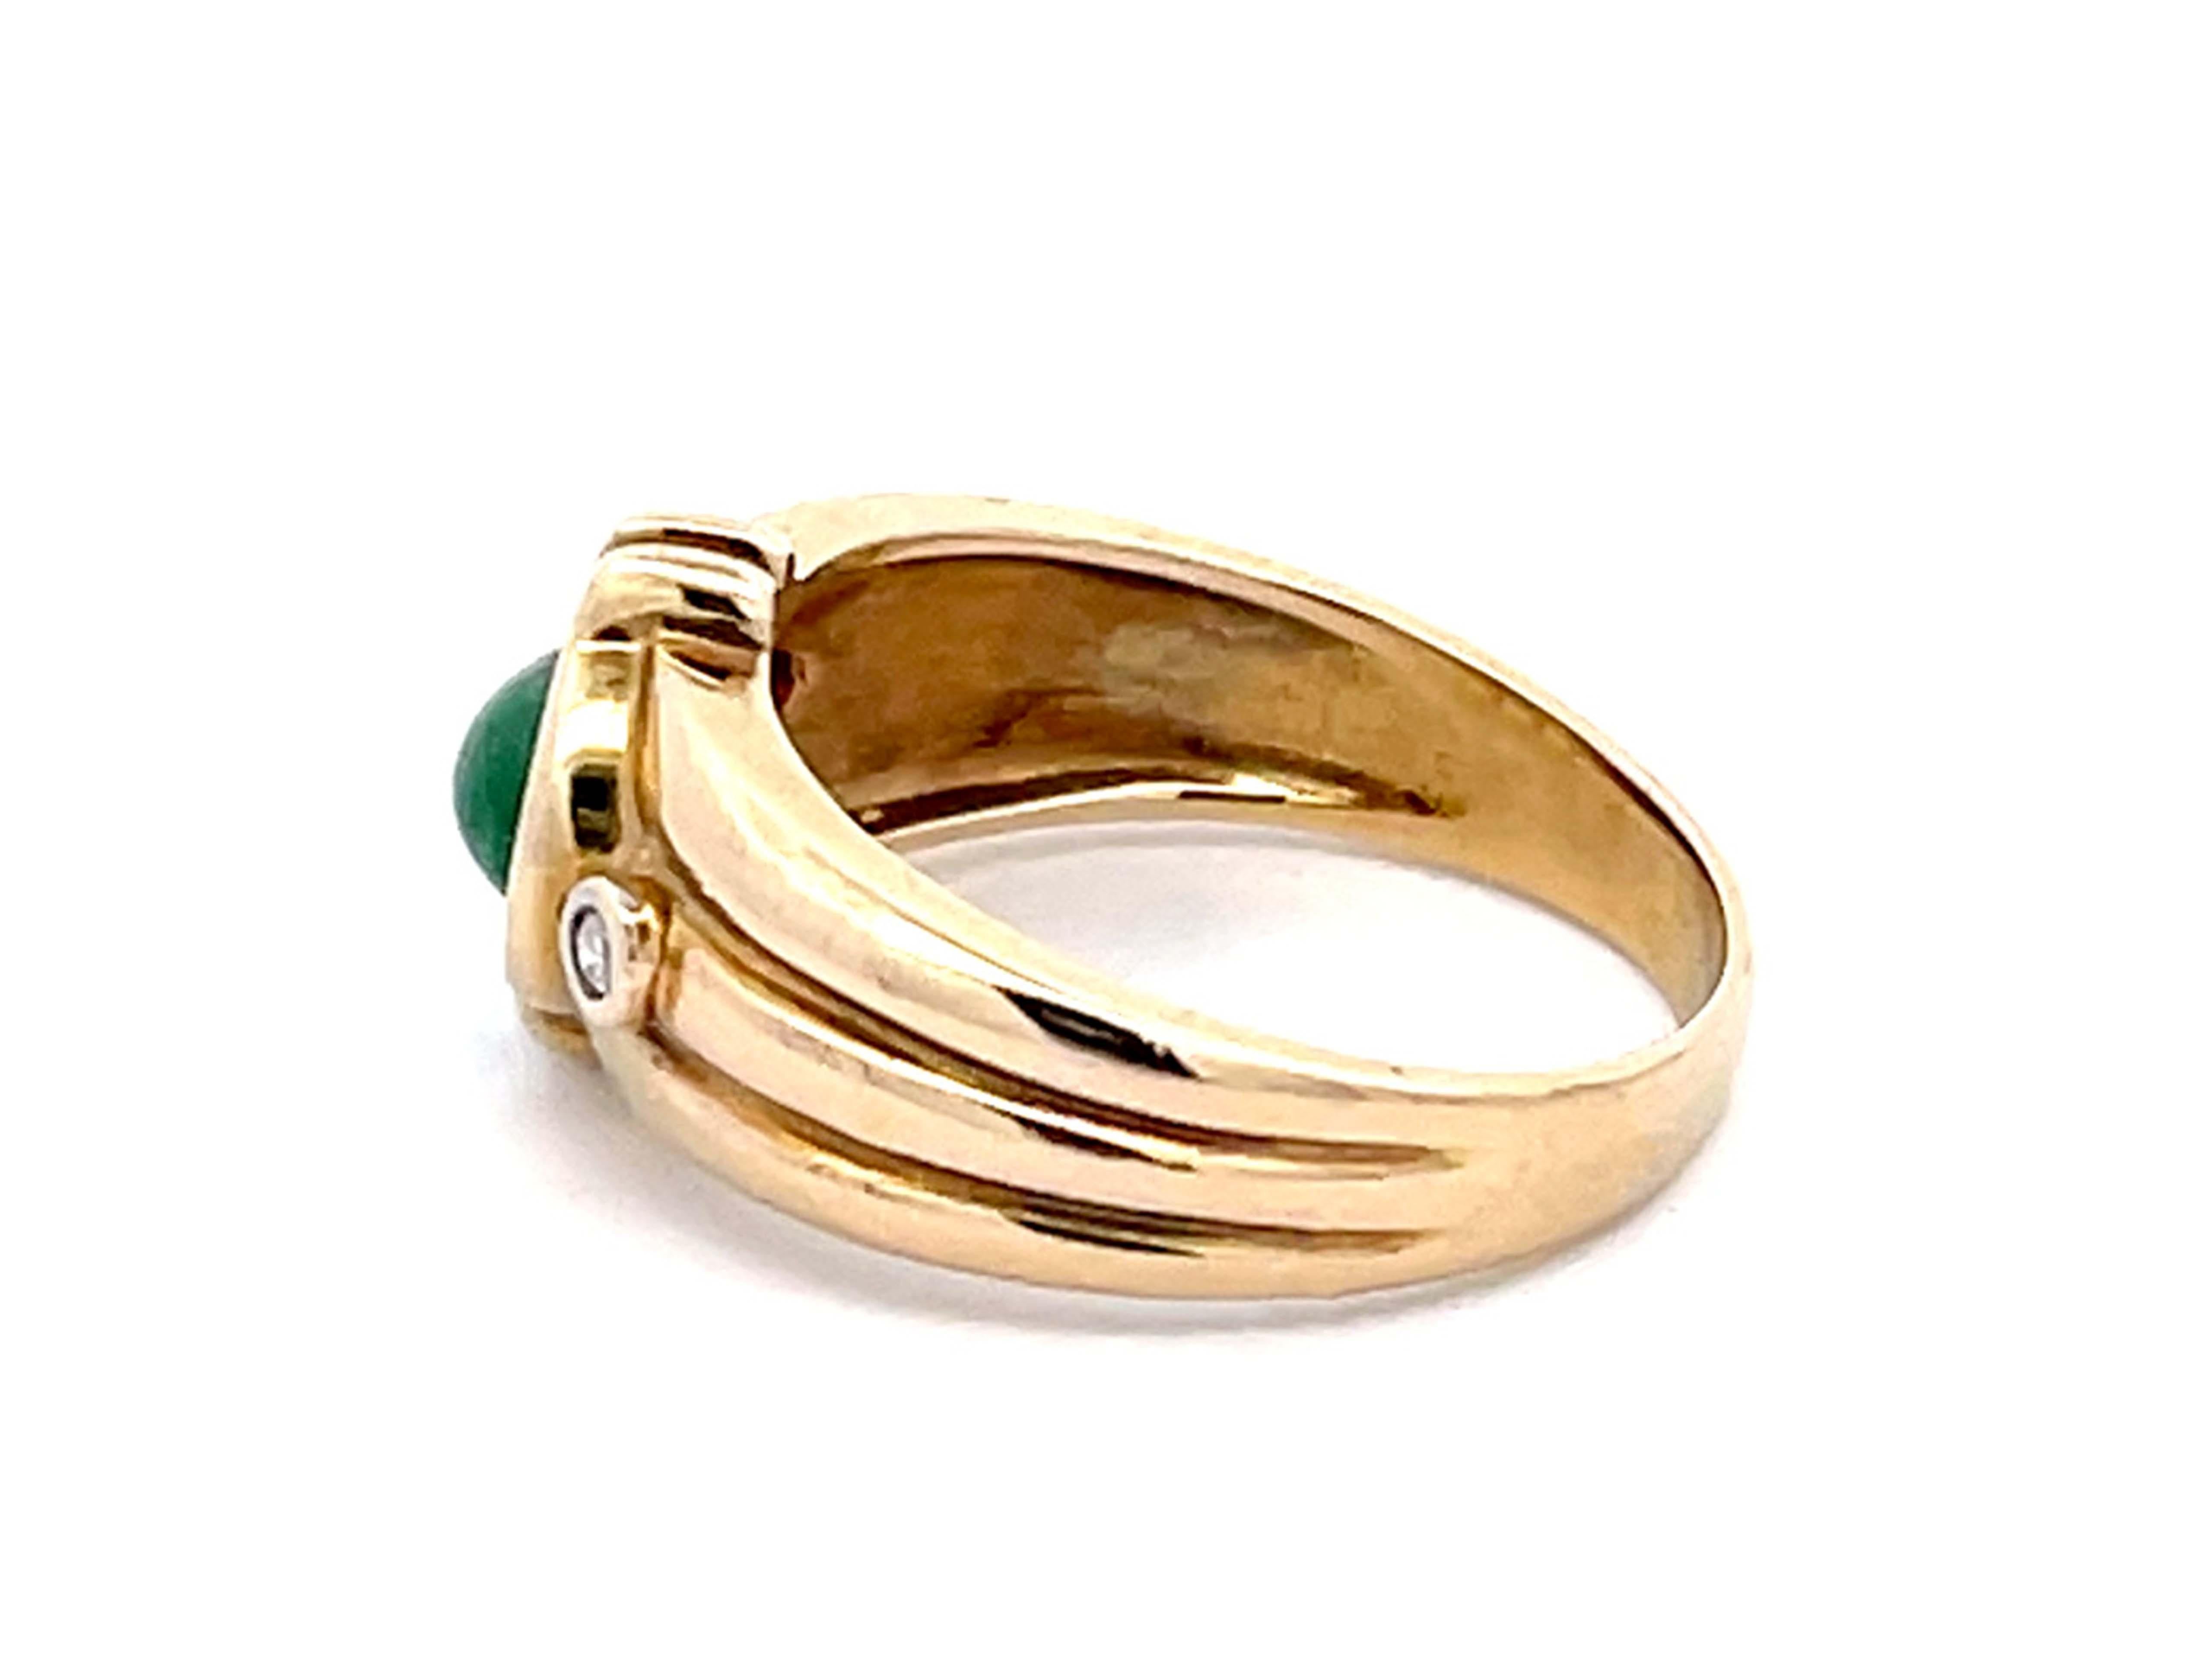 Oval Green Cabochon Emerald and Diamond Ring in 14k Yellow Gold In Excellent Condition For Sale In Honolulu, HI